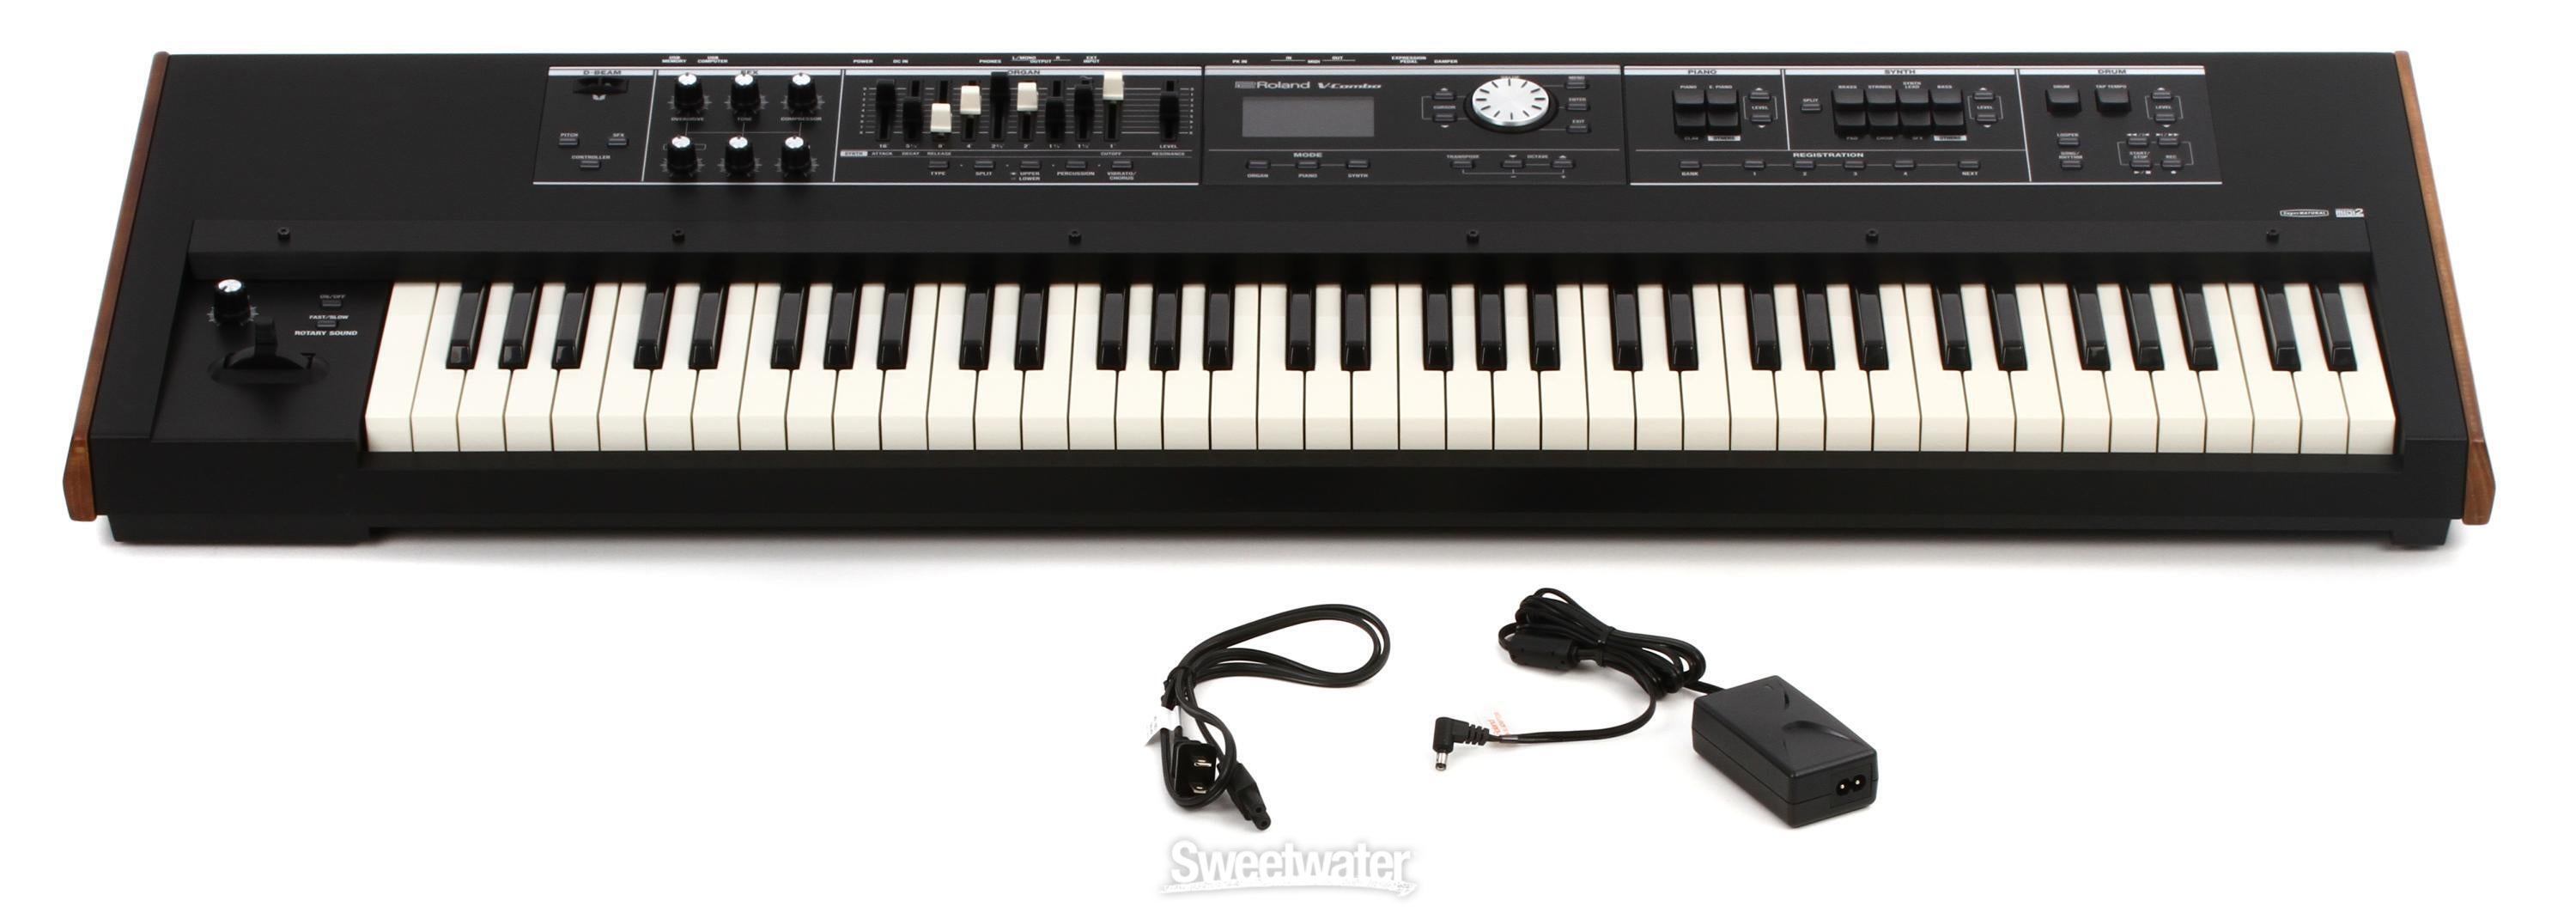 Roland V-Combo VR-730 73-key Live Performance Keyboard | Sweetwater